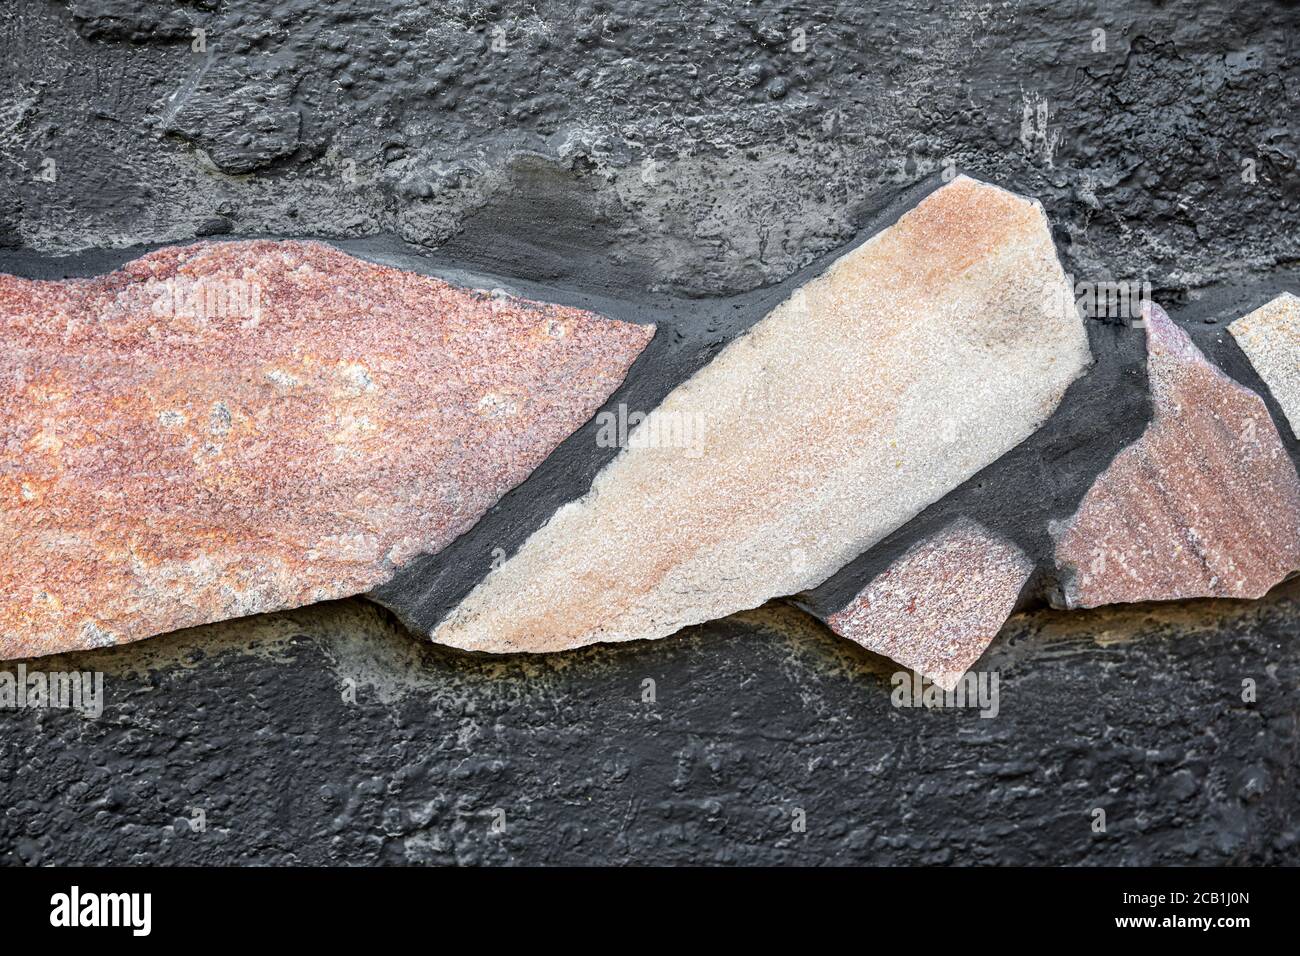 freshly laid quartzite stone slabs, tile adhesive and grey grout, outdoor Stock Photo